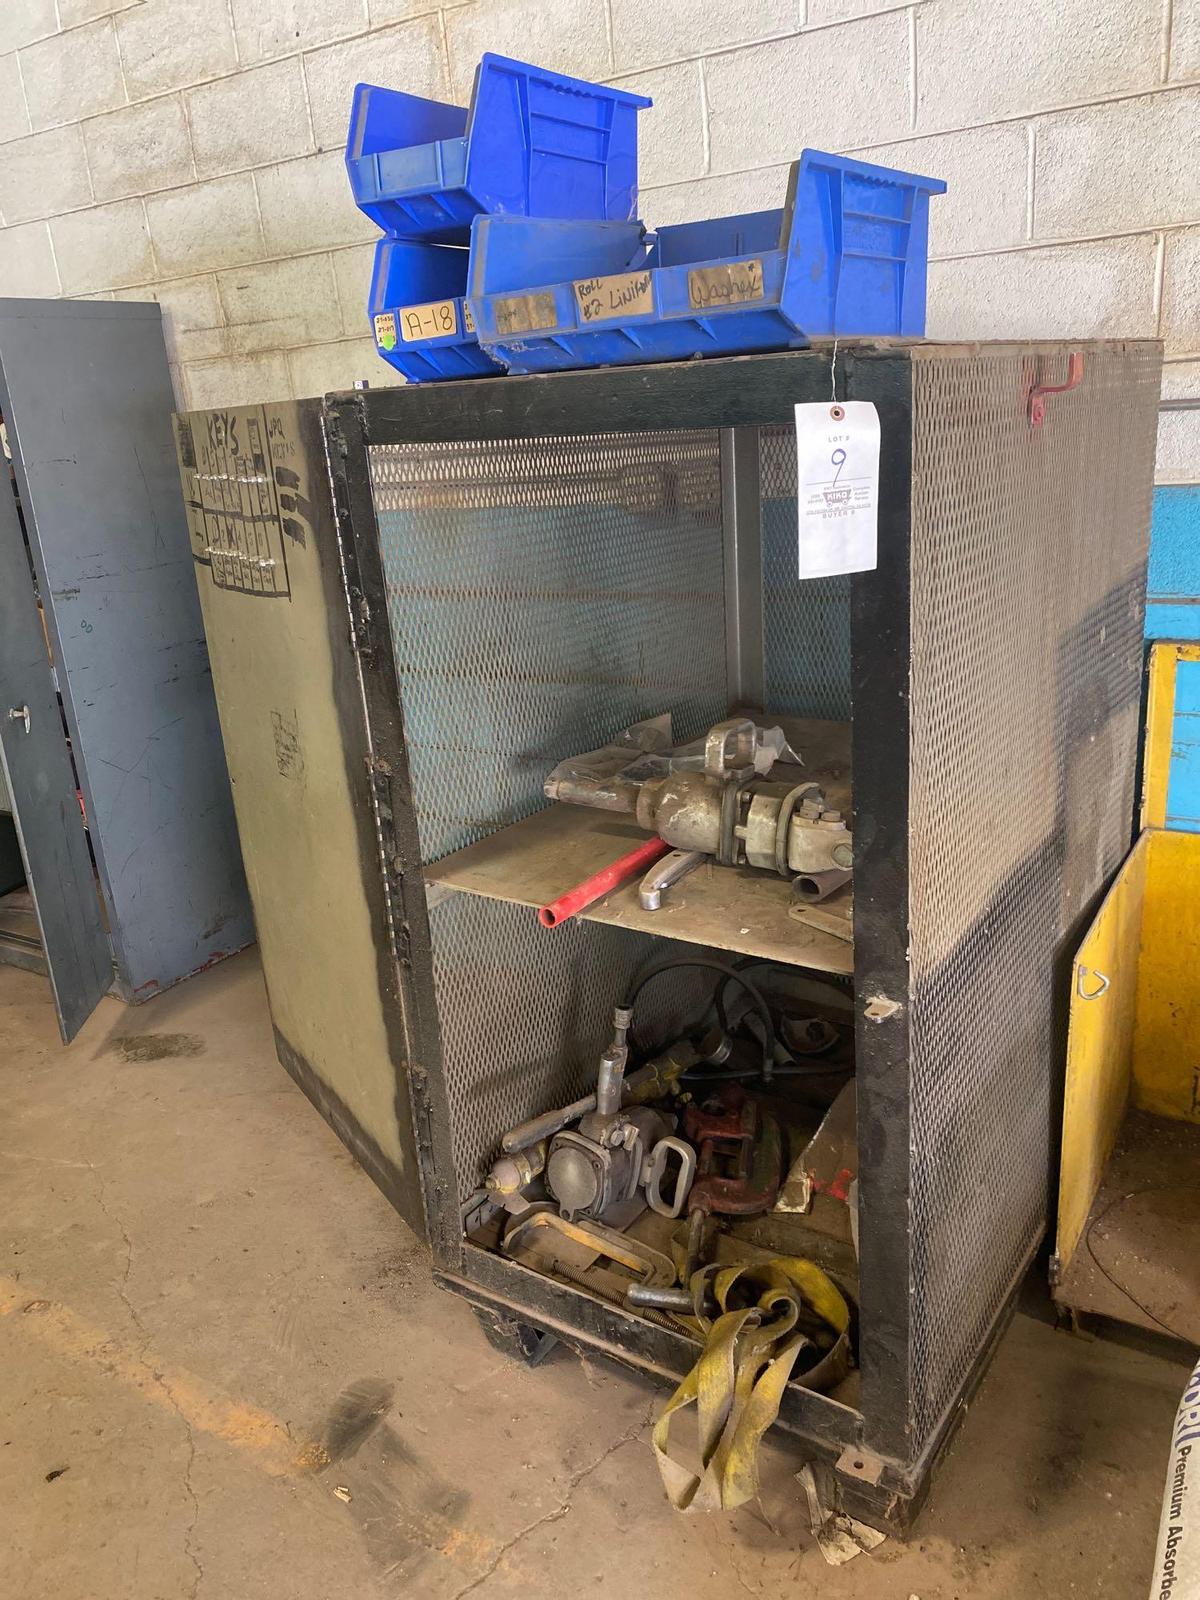 Metal mesh cabinet and contents, pipe cutter, impacts